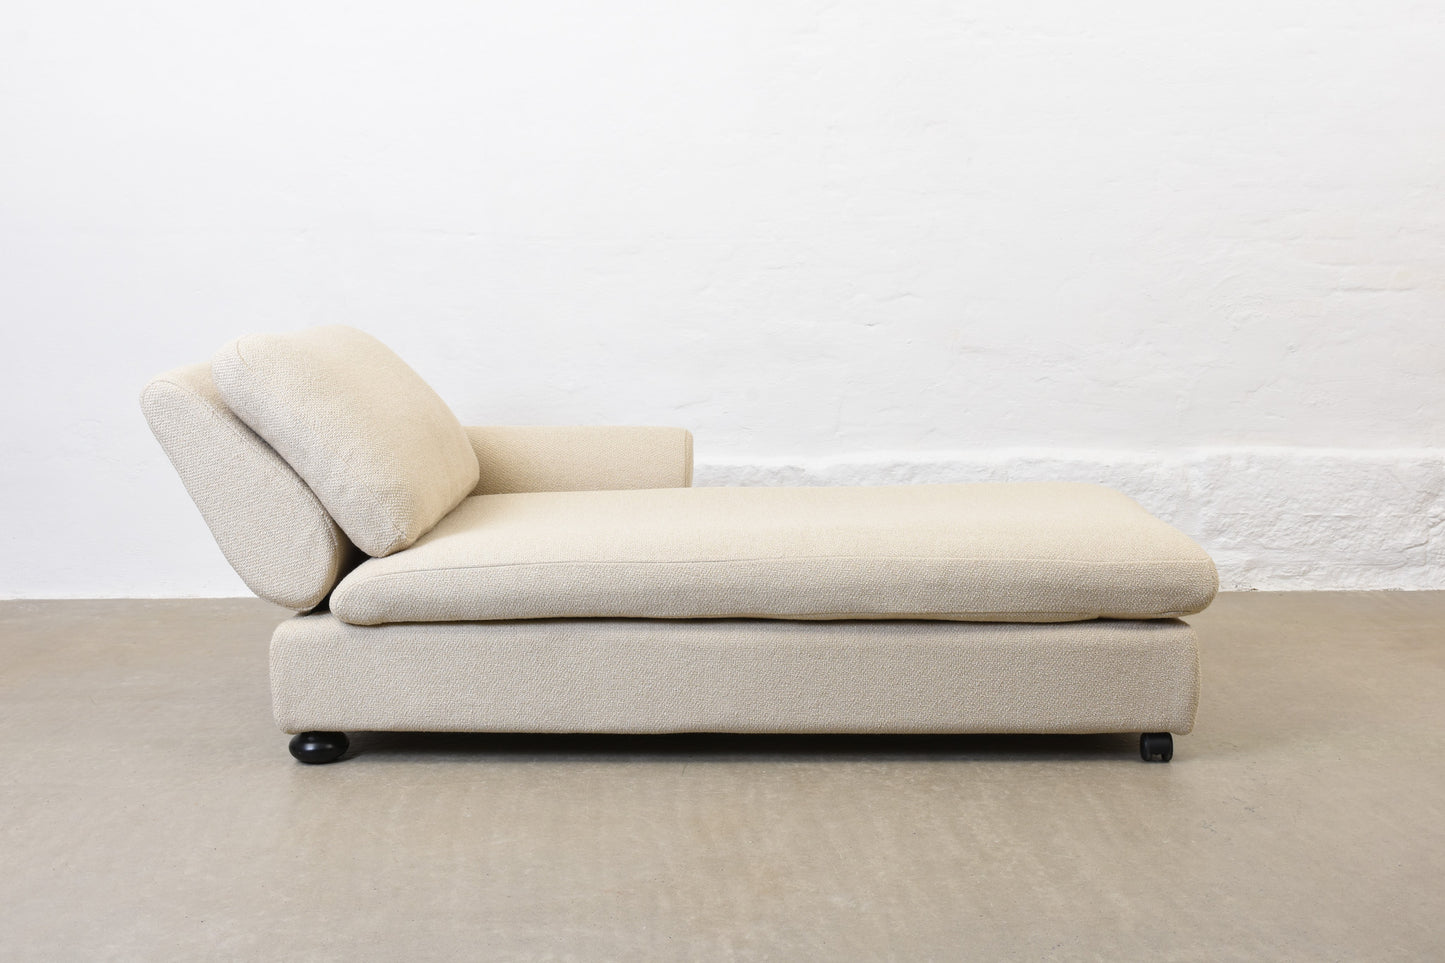 Newly reupholstered: 1980s reclining divan by Dux